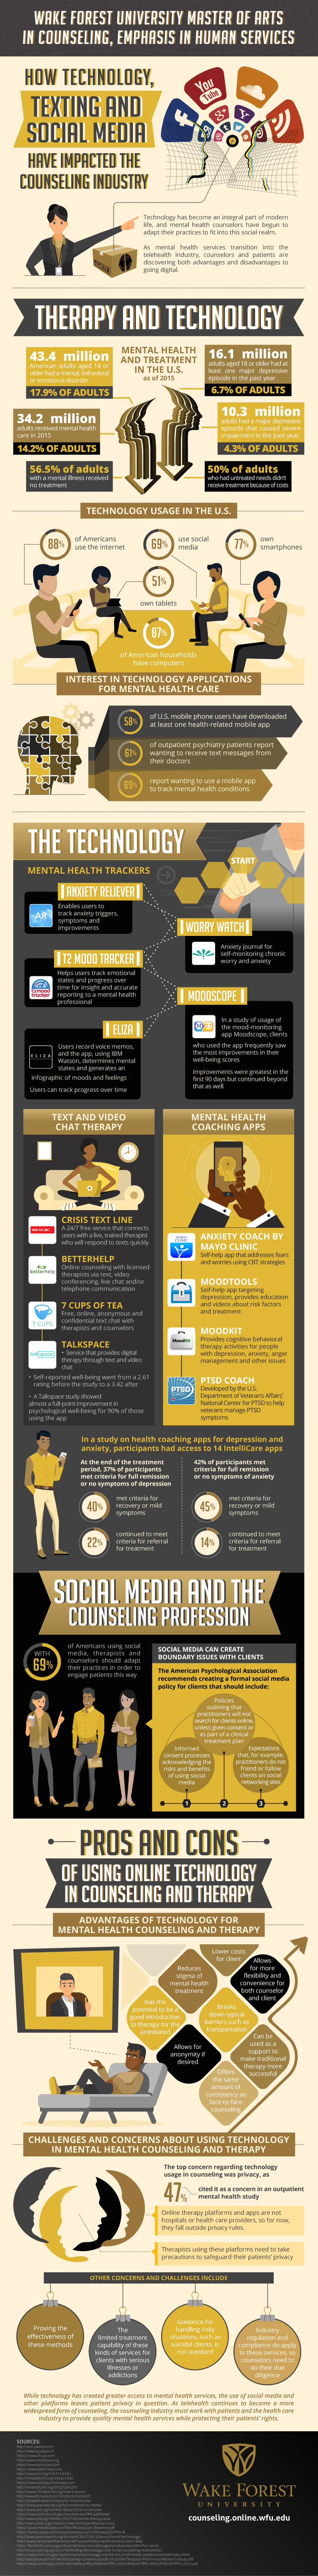 Infographic: The impact of technology, texting, and social media to counseling industry.